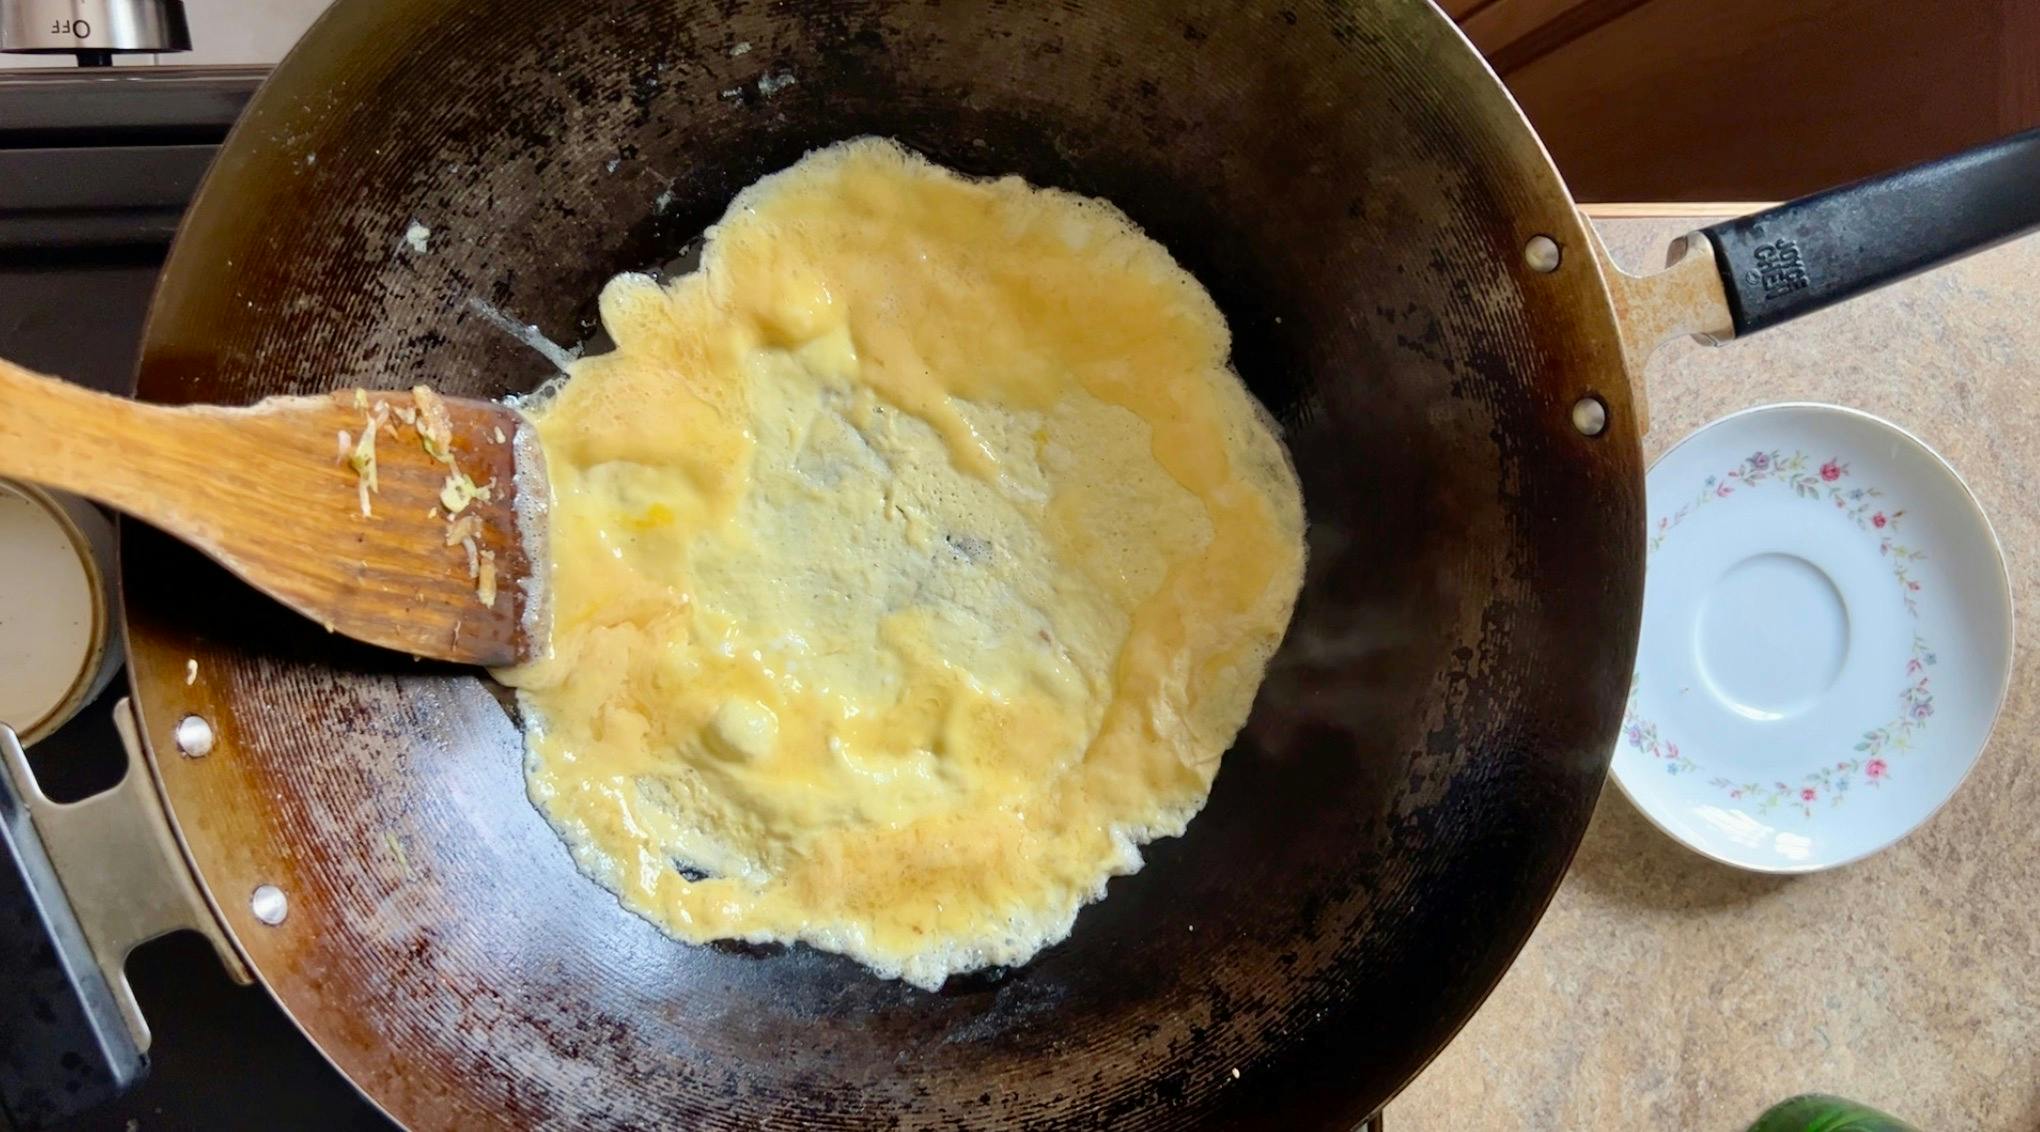 A thin omelette cooking in a wok.